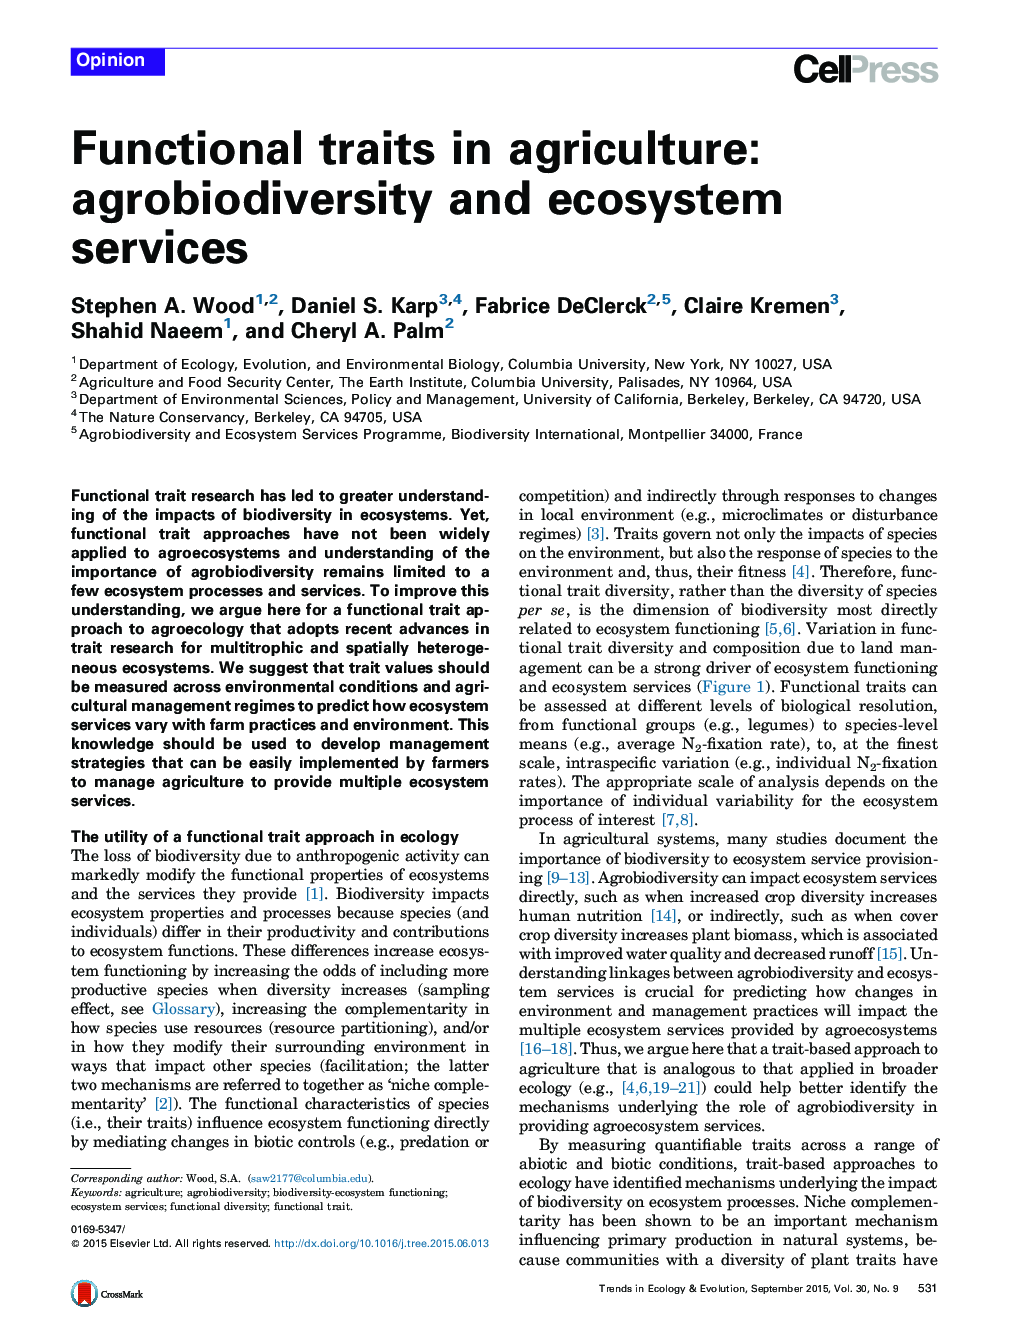 Functional traits in agriculture: agrobiodiversity and ecosystem services